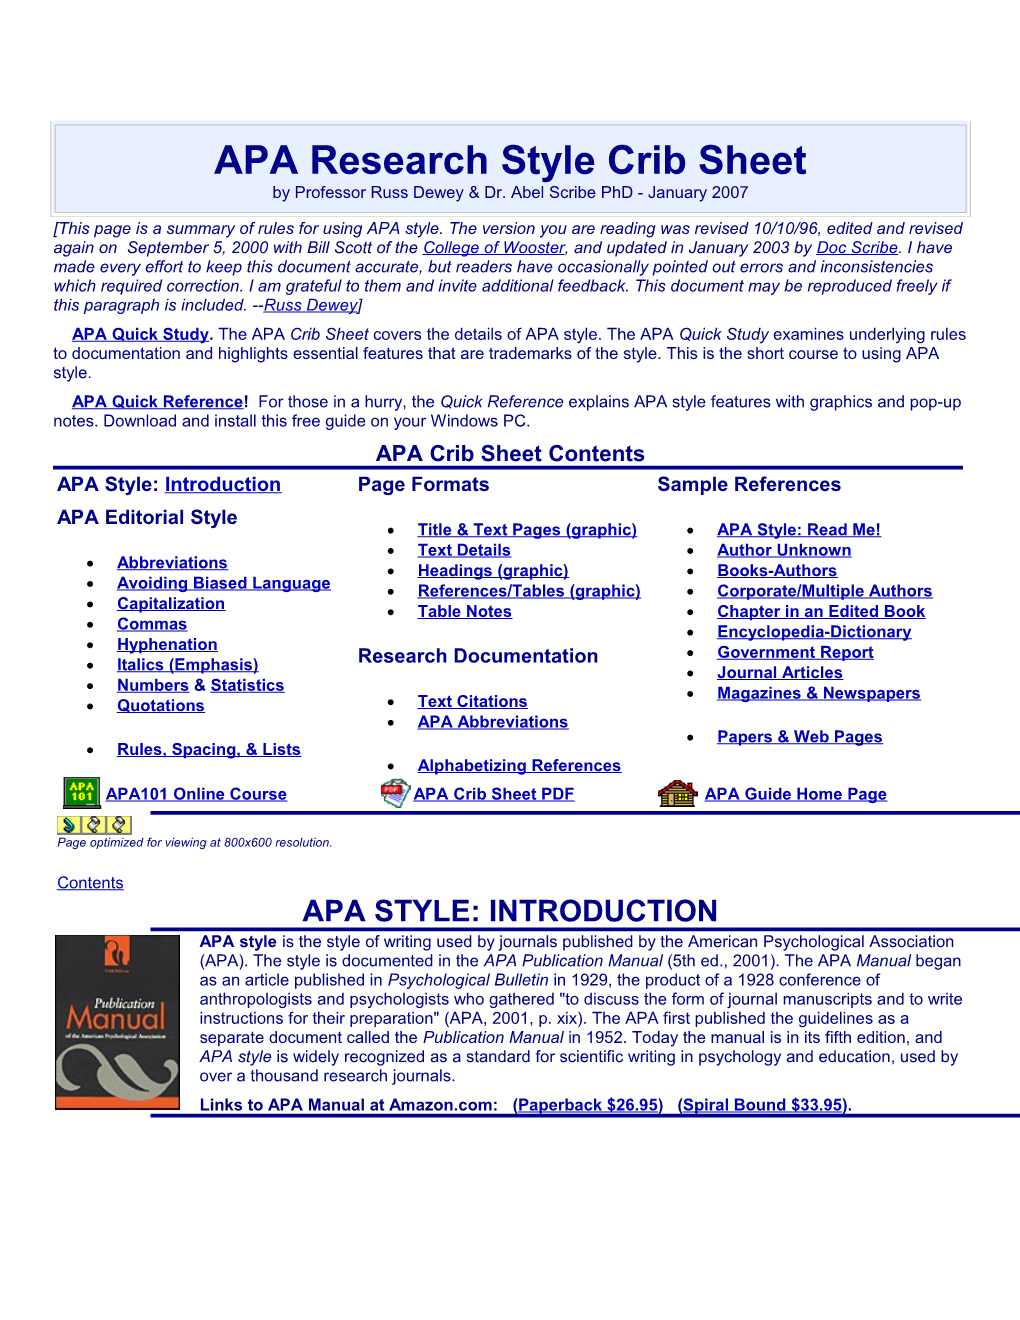 Apa Style: Introduction